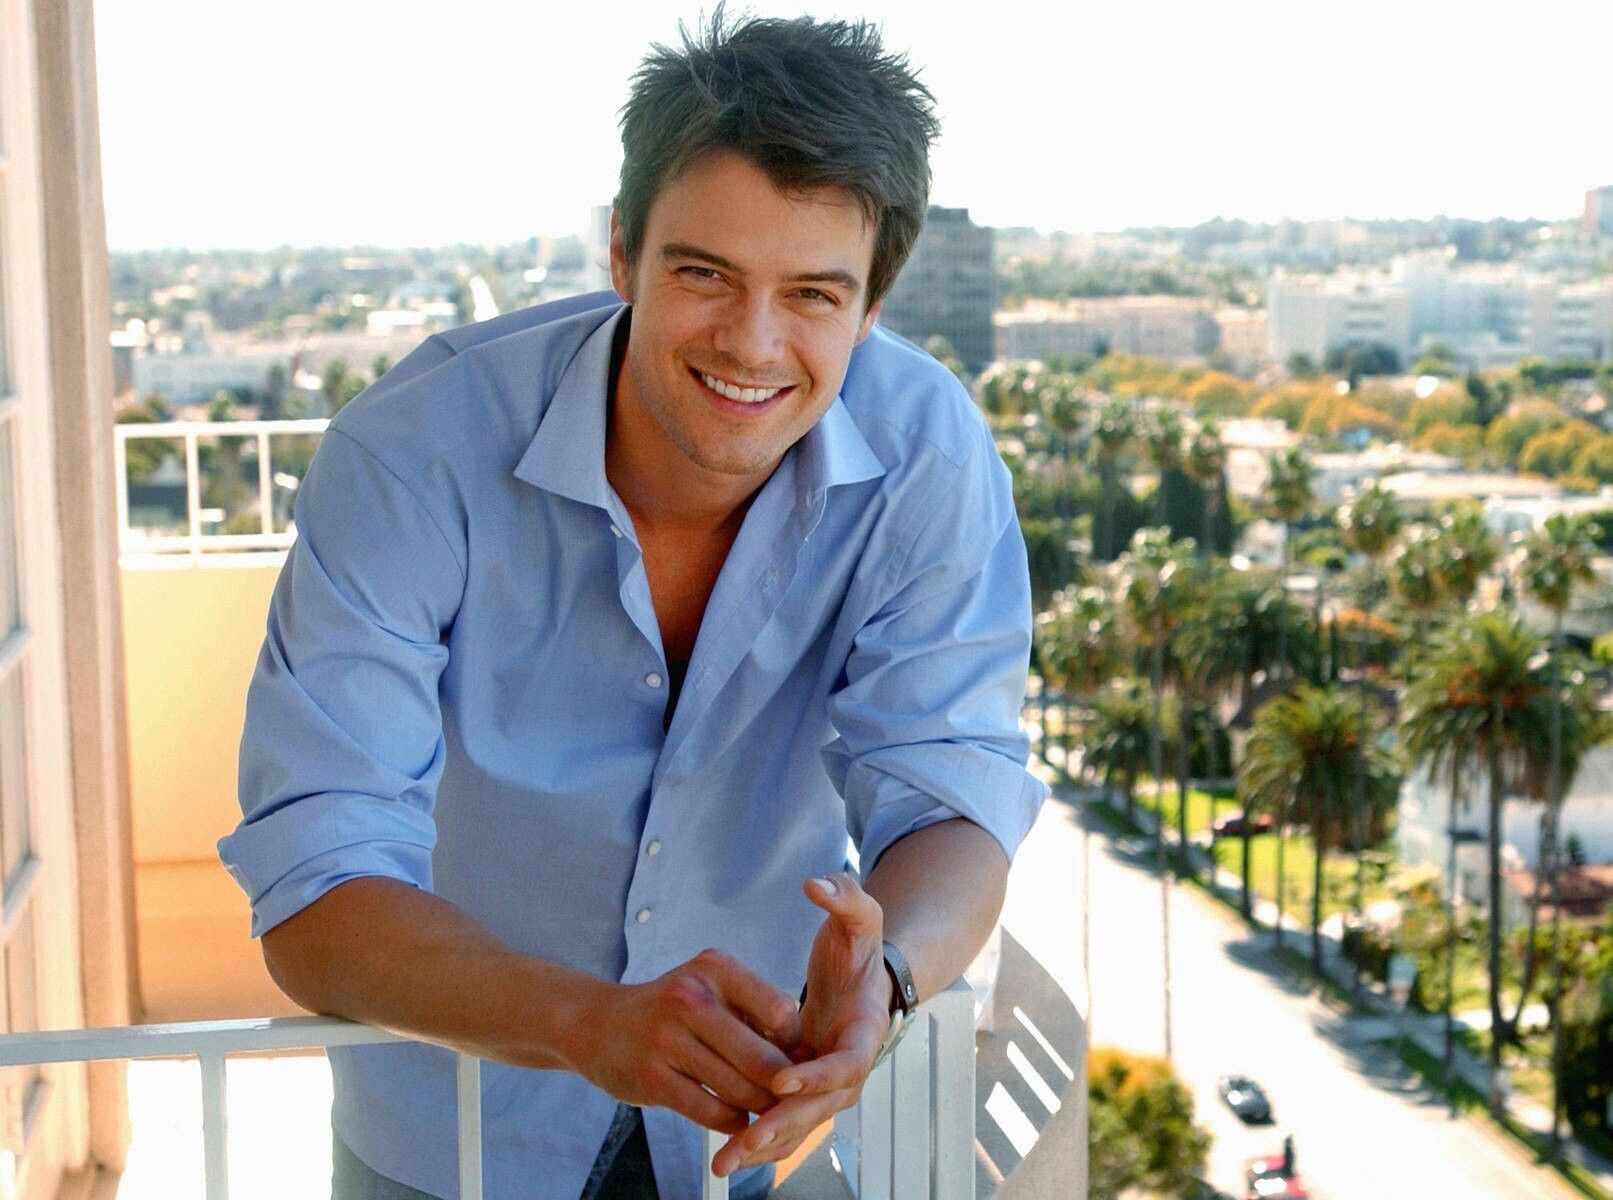 JOSH DUHAMEL. Express Hollywood, Celebrities Biography From All over the World